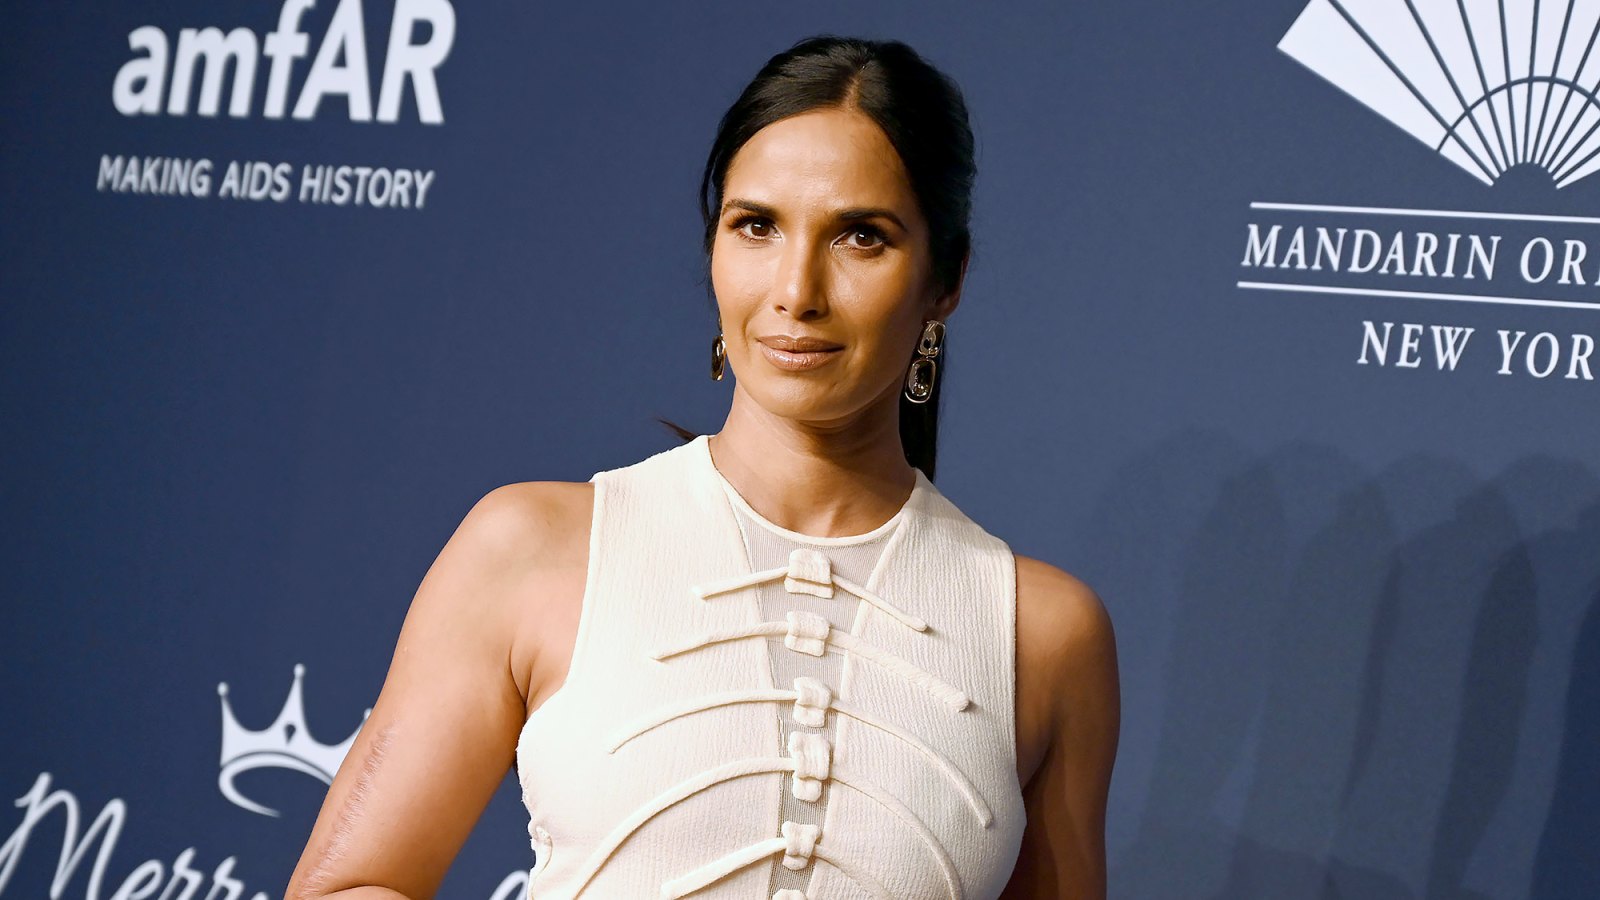 Padma Lakshmi Claps Back After Criticism for Not Wearing Bra in Tutorial 2